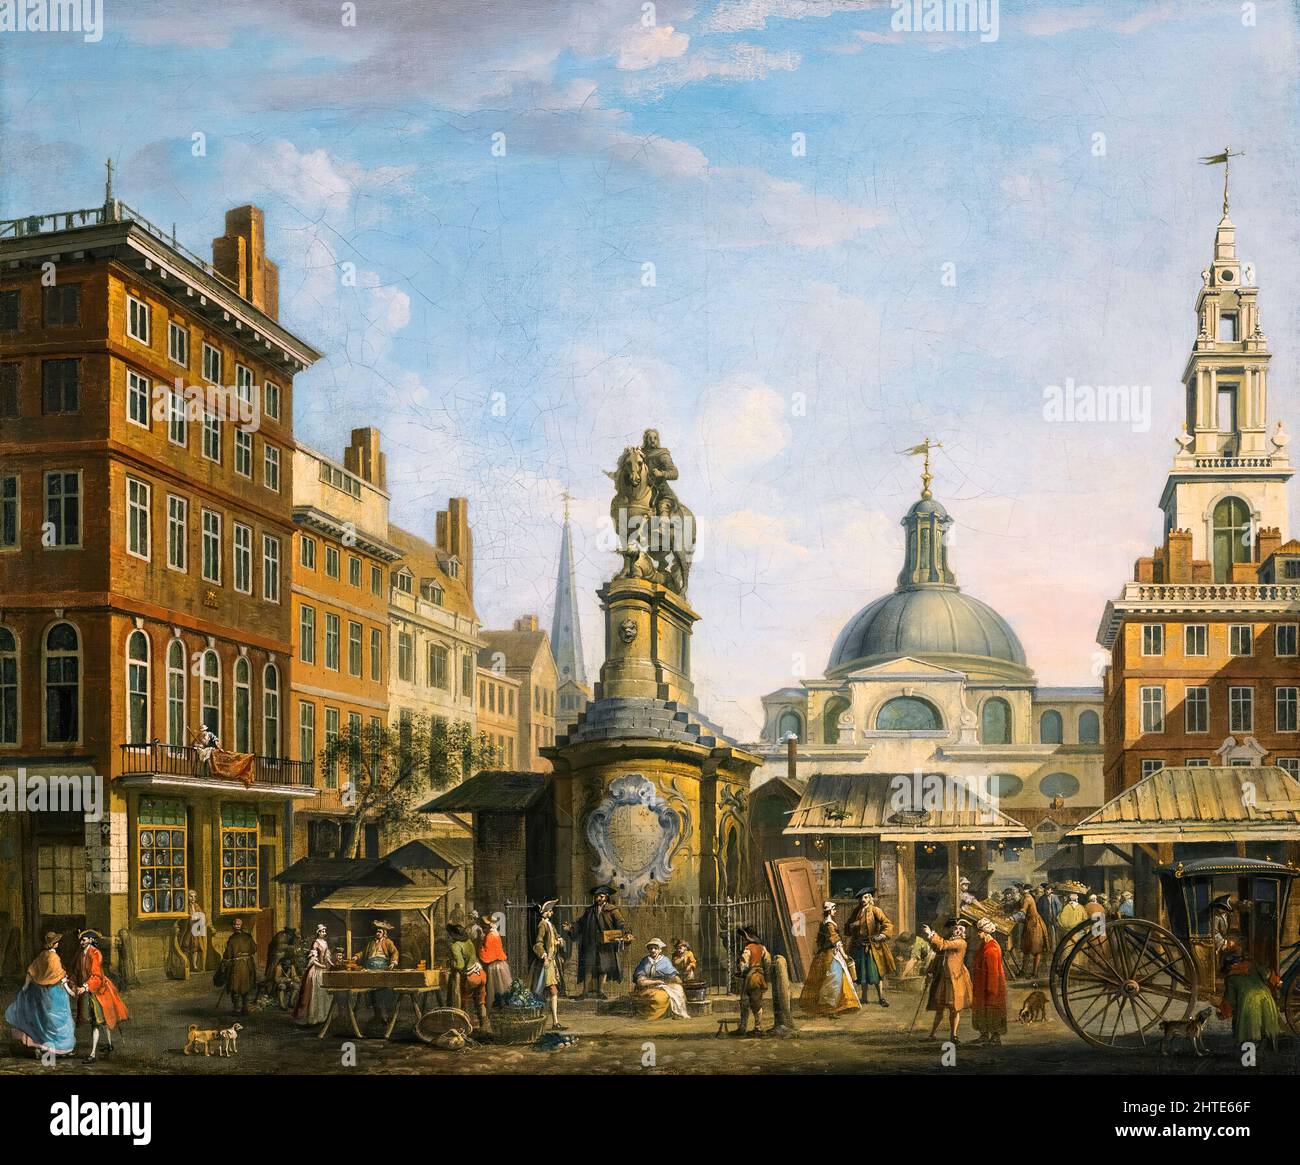 View of the Stocks Market, London, oil on canvas painting by Joseph Nickolls, before 1738 Stock Photo